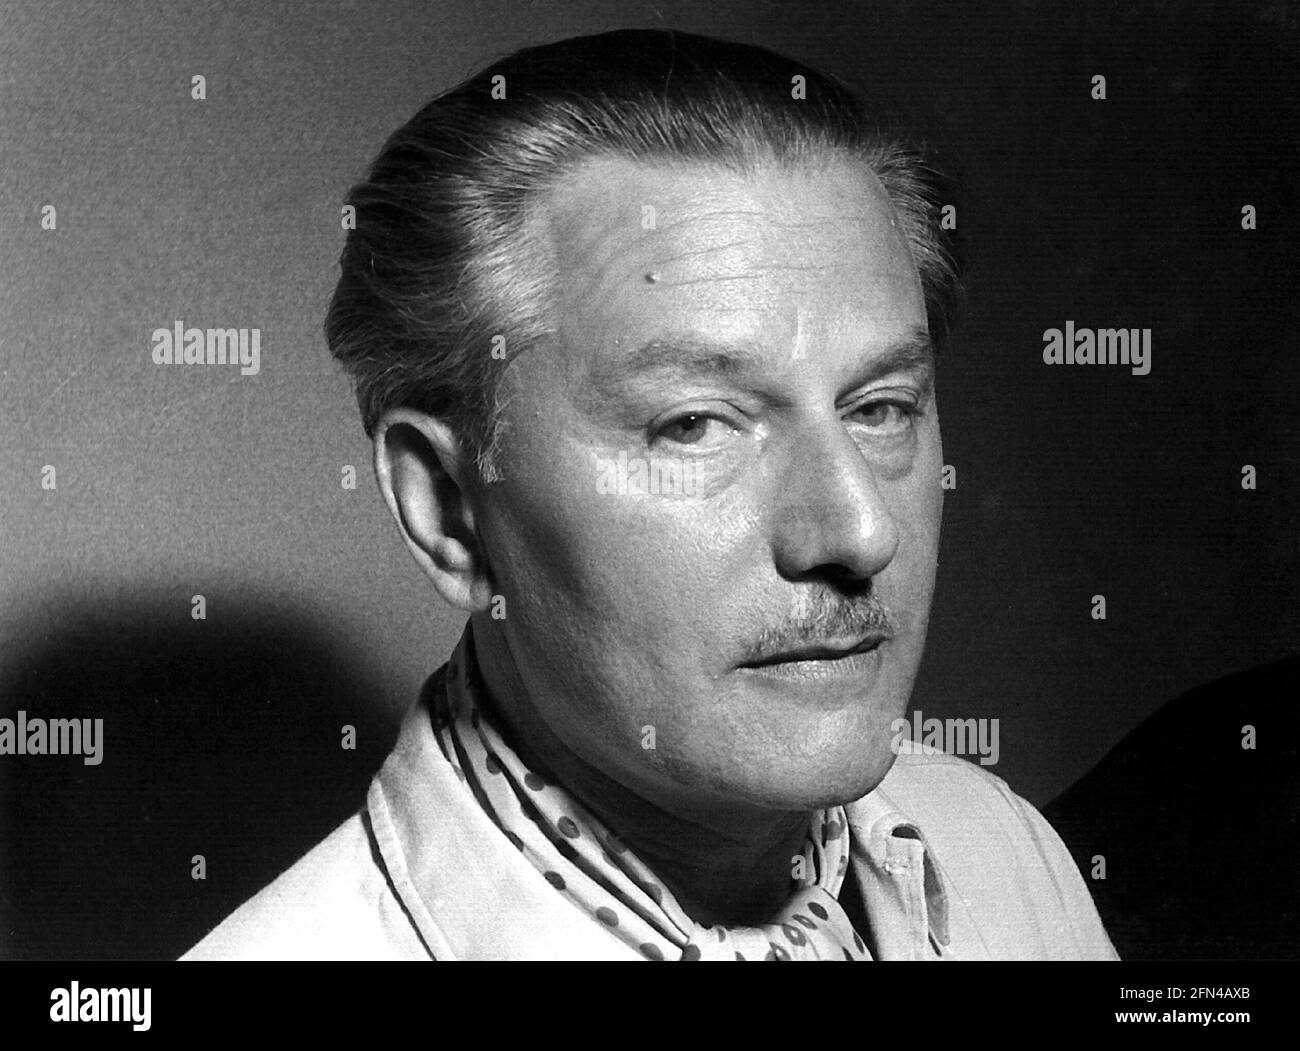 Walbrook, Anton (born Adolf Anton Wohlbrueck), 19.11.1896 - 9.8.1967, Austrian actor, portrait, ADDITIONAL-RIGHTS-CLEARANCE-INFO-NOT-AVAILABLE Stock Photo